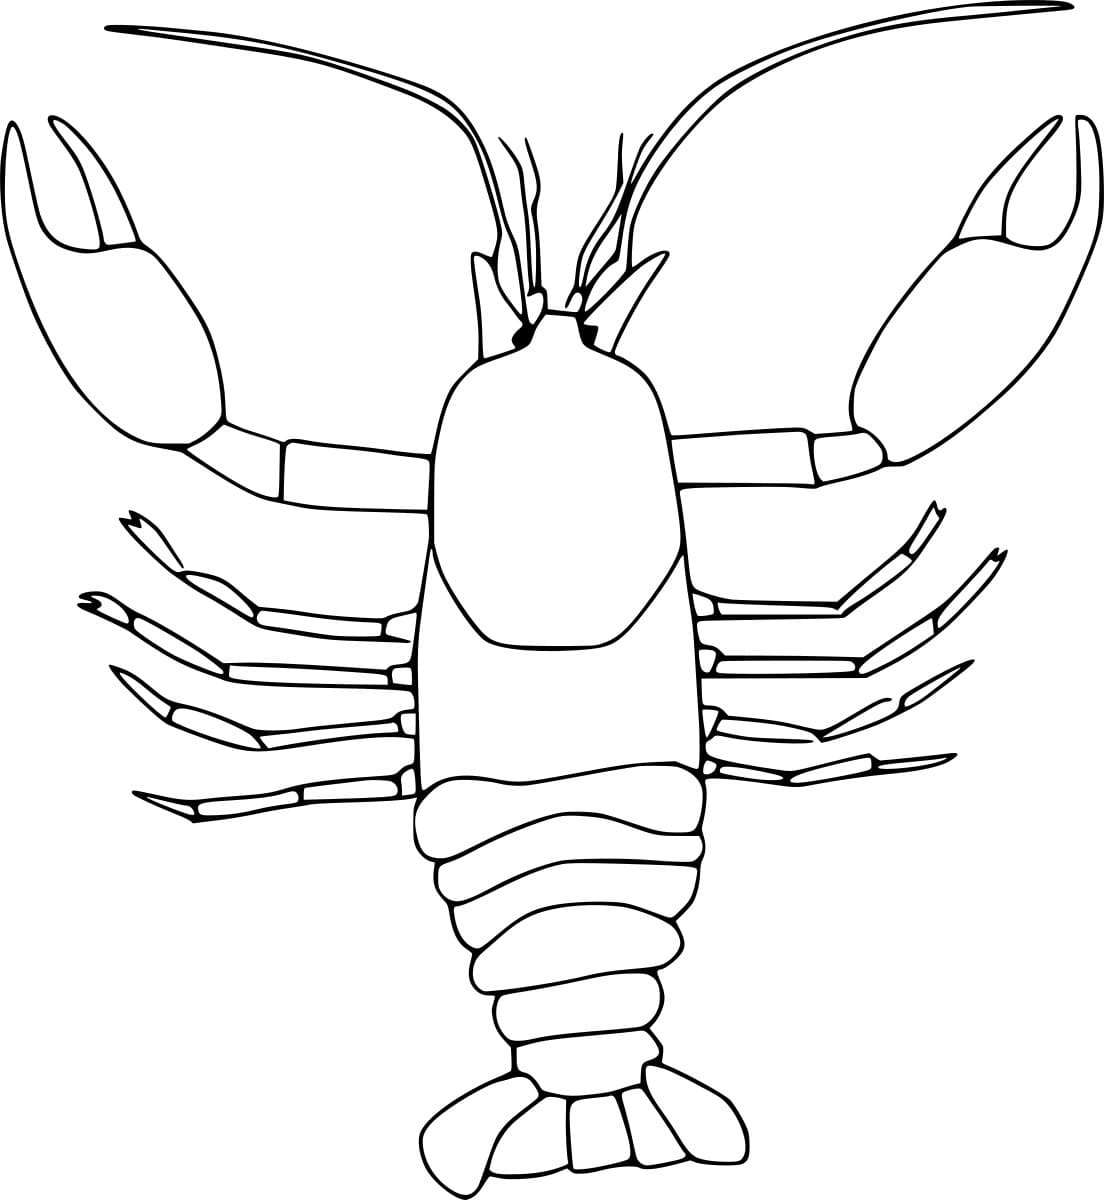 Easy Giant Lobster Coloring Page